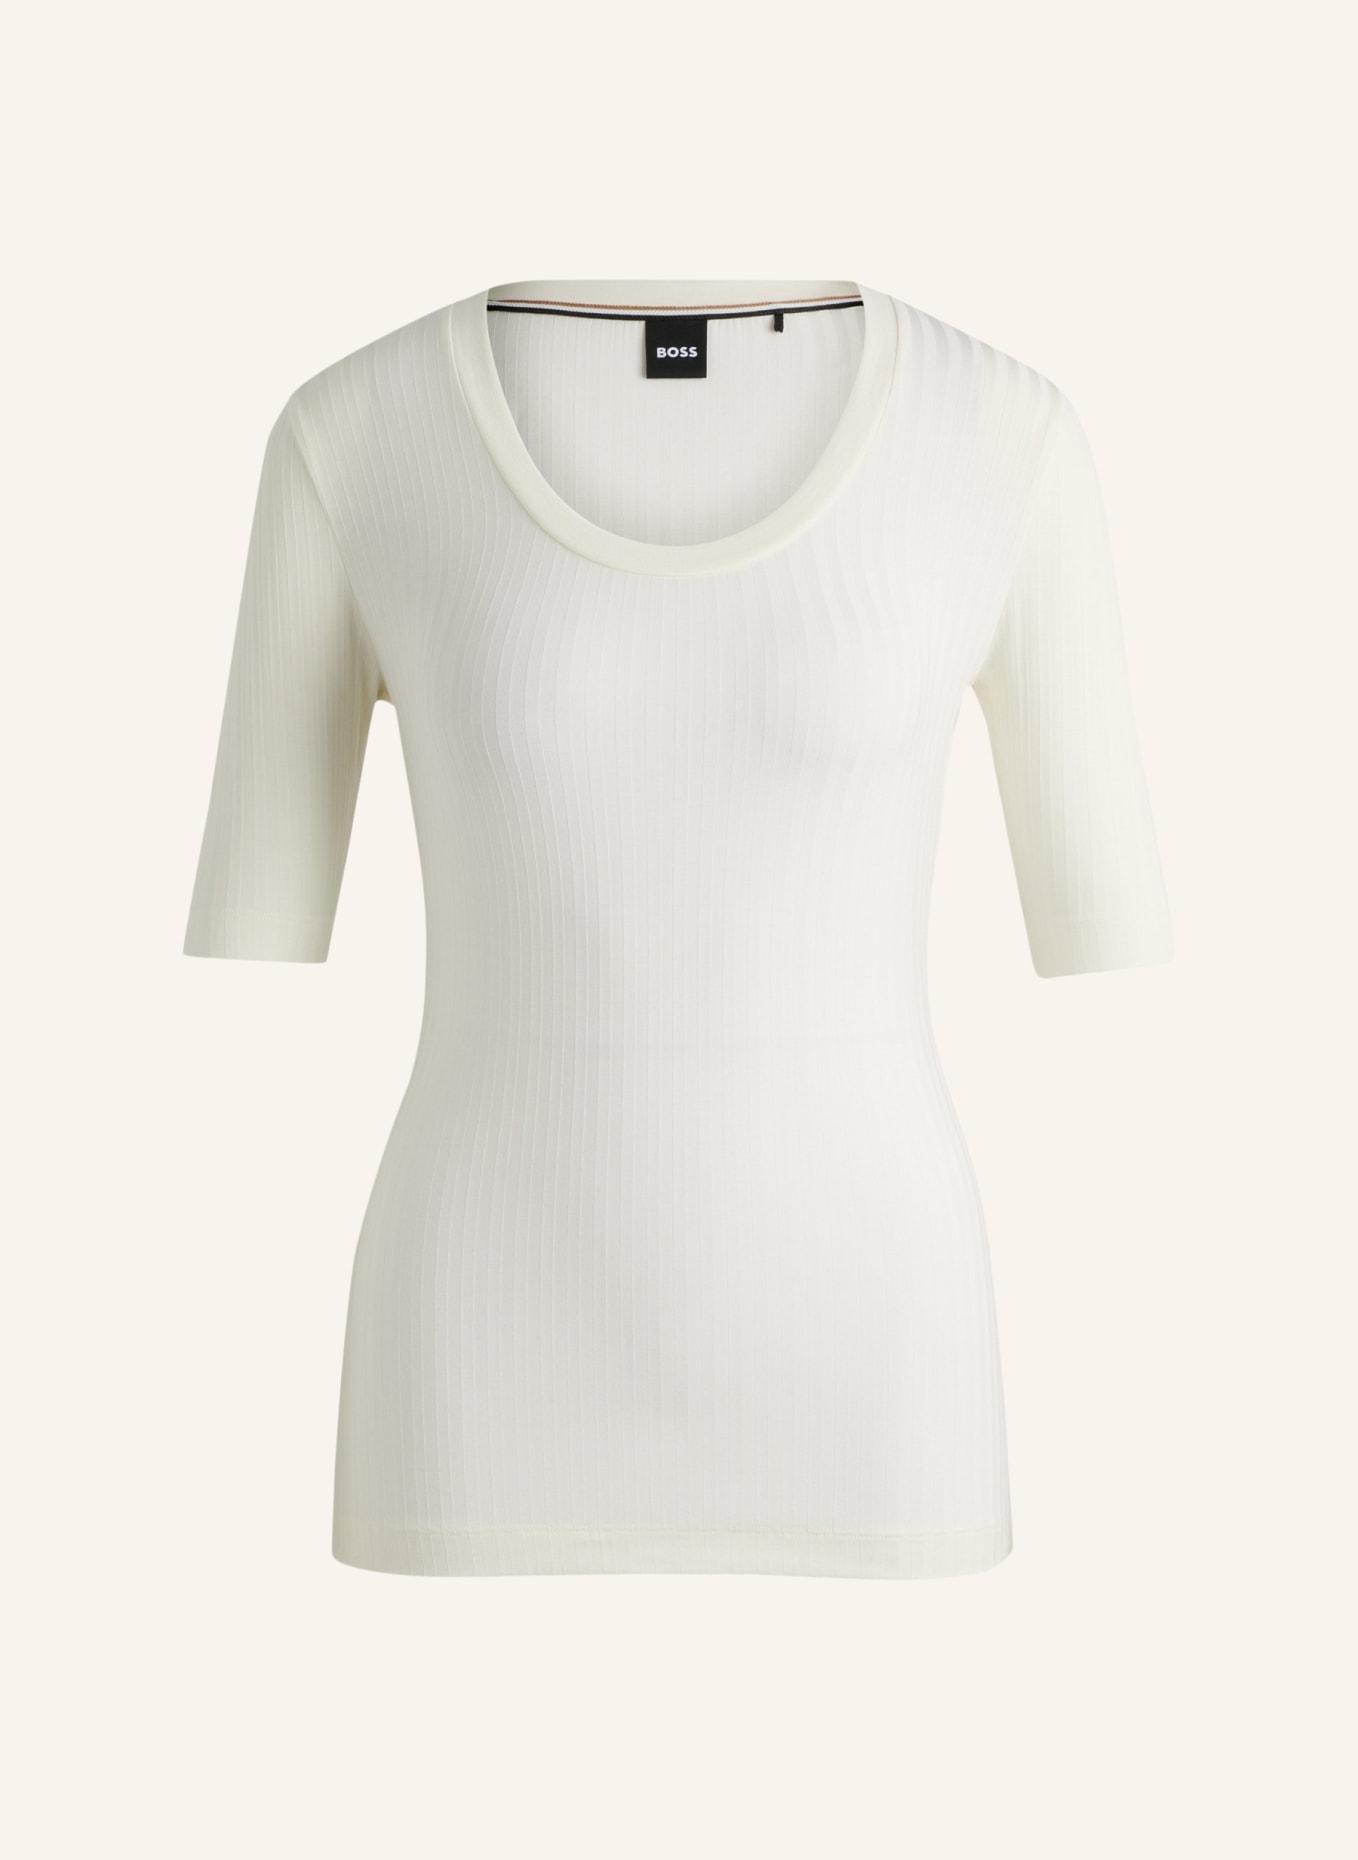 BOSS Casual Top EFFILIE Slim Fit, Farbe: WEISS (Bild 1)